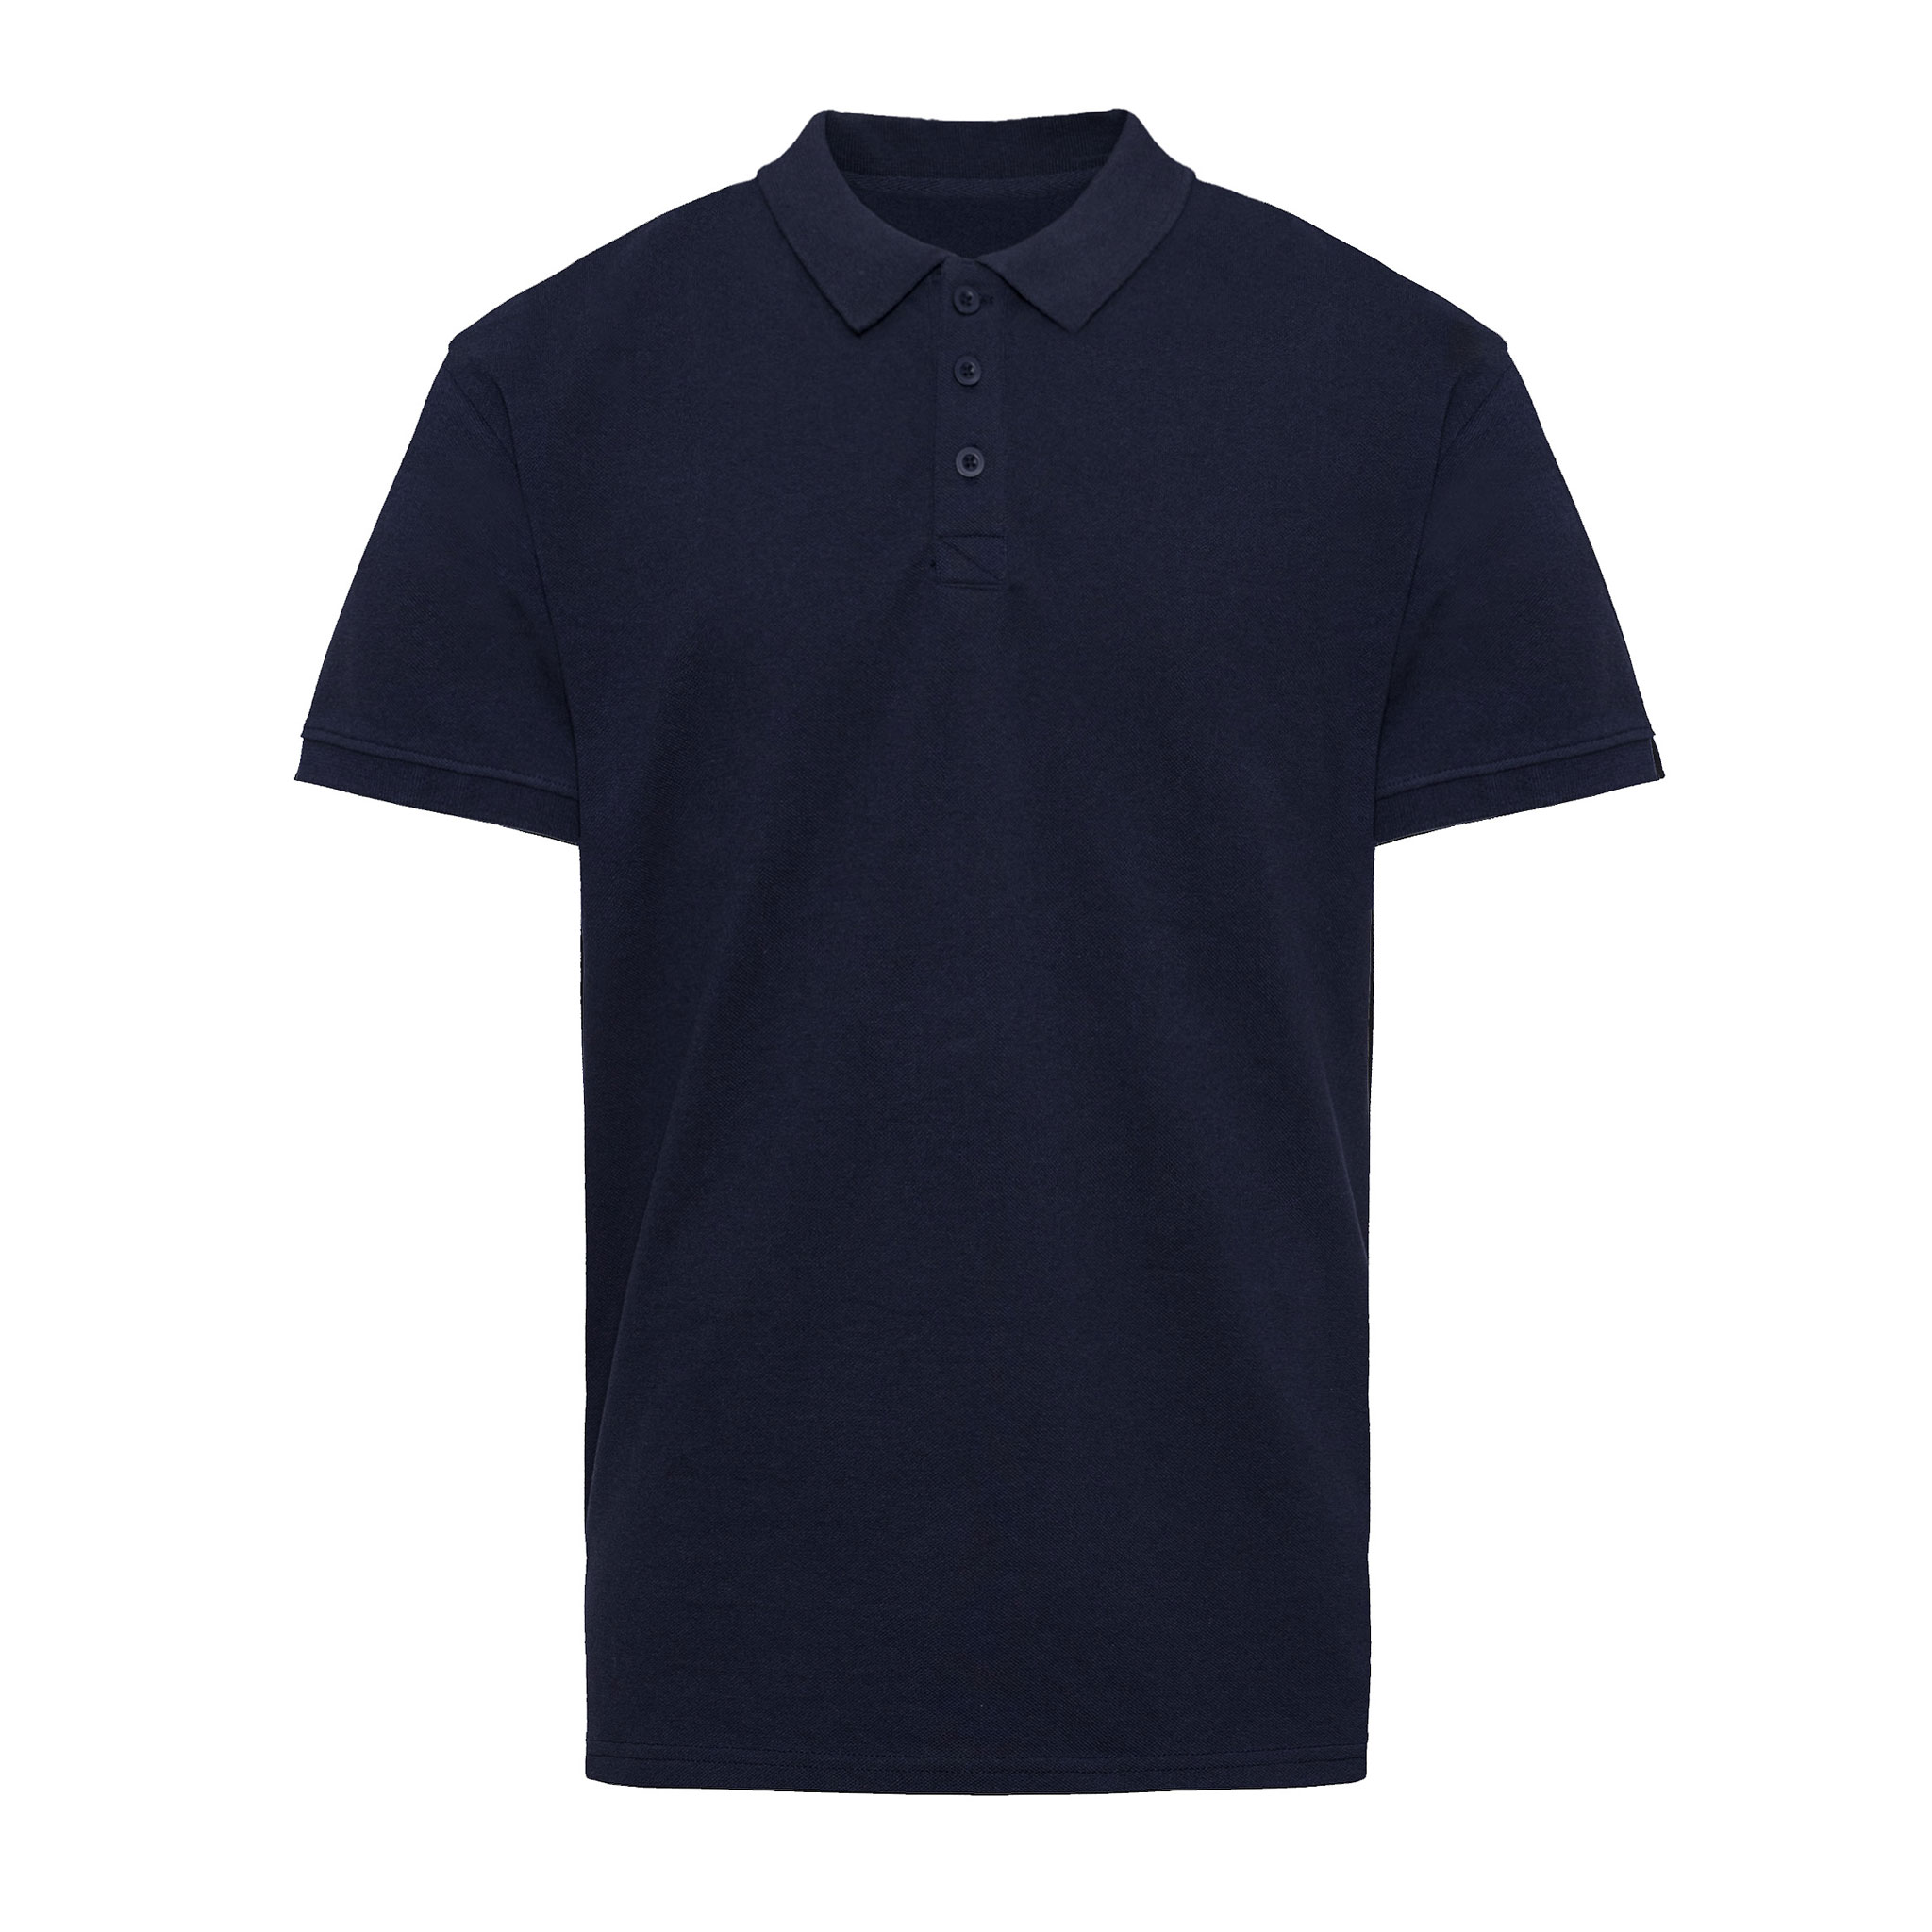 Pure Waste pique polo, made from recycled cotton and recycled plastic bottles